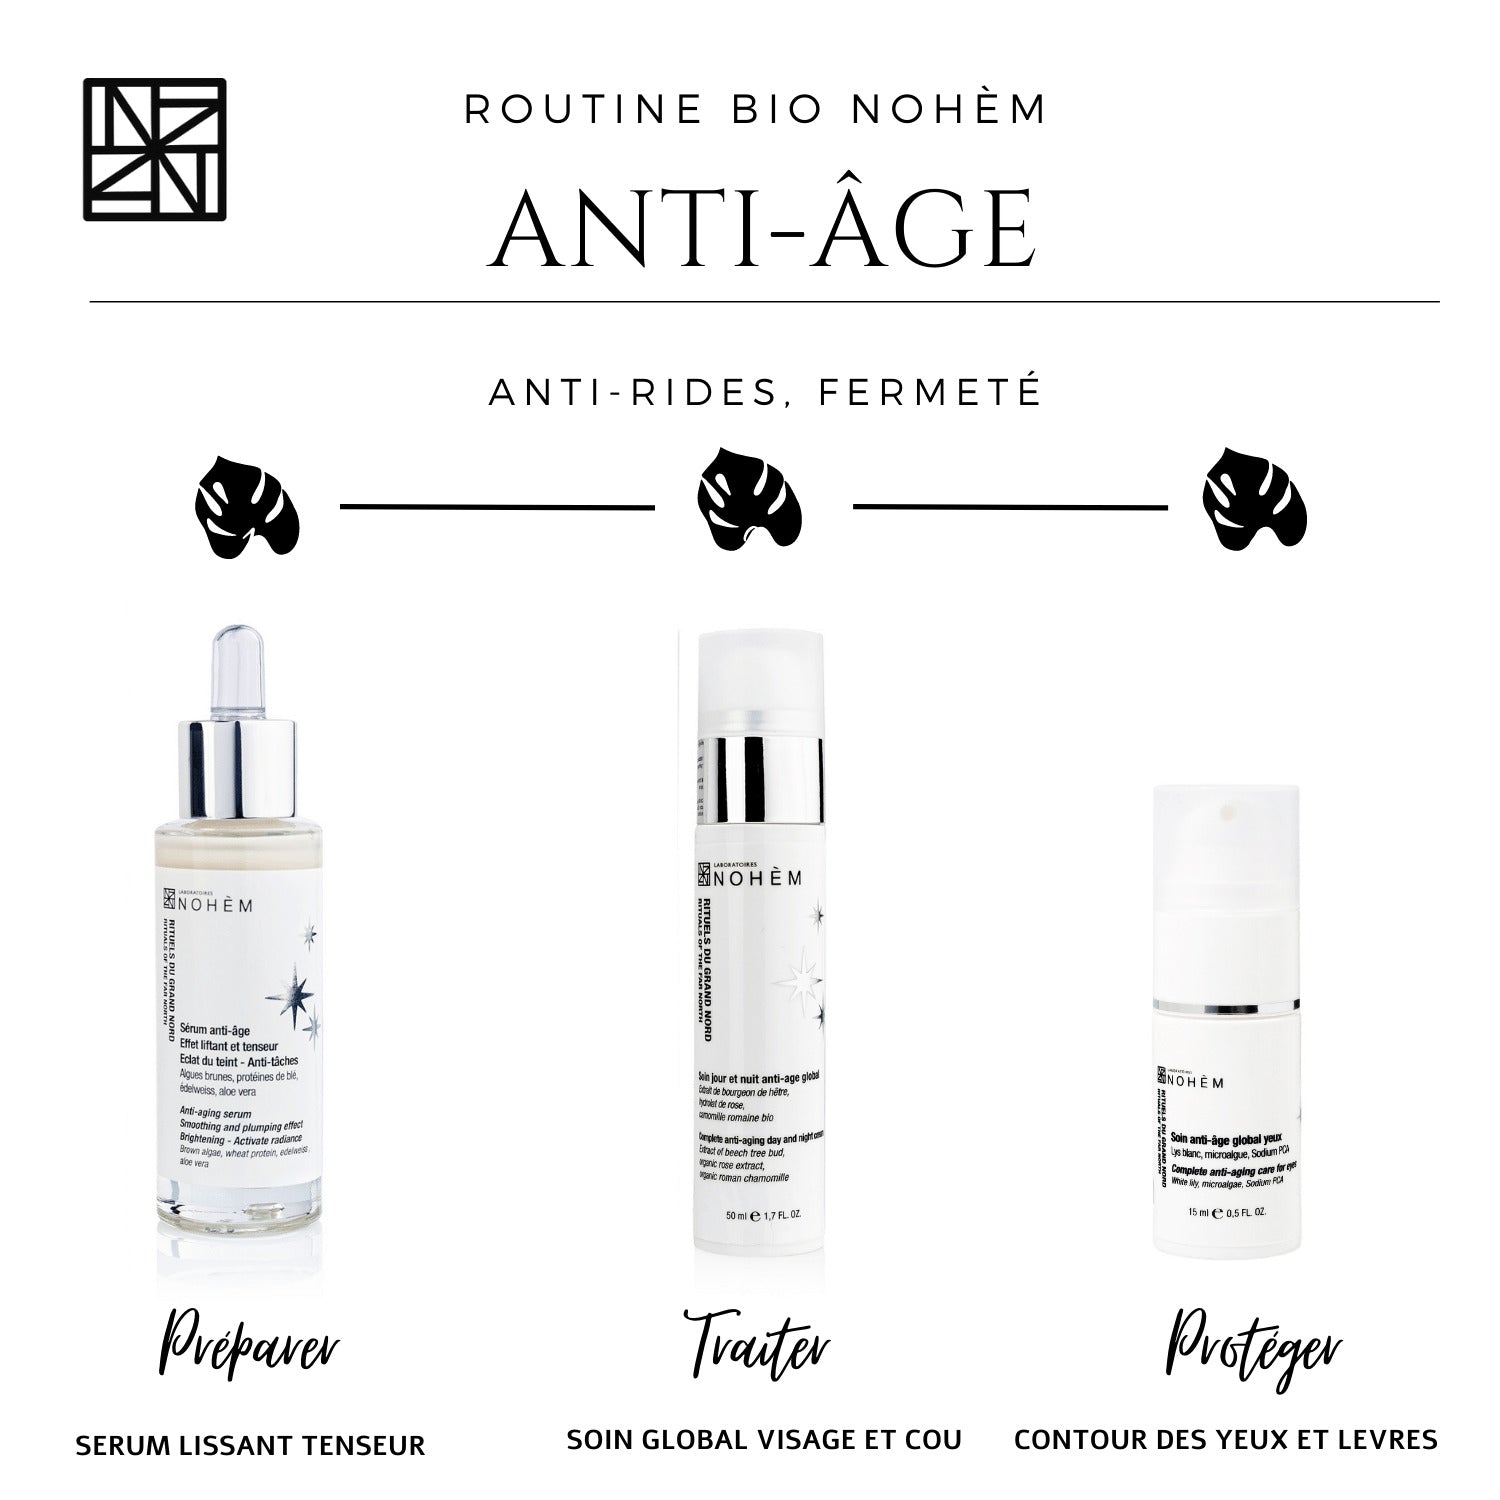 Anti-aging serum, lifting and tightening effect, complexion radiance and anti-dark spots